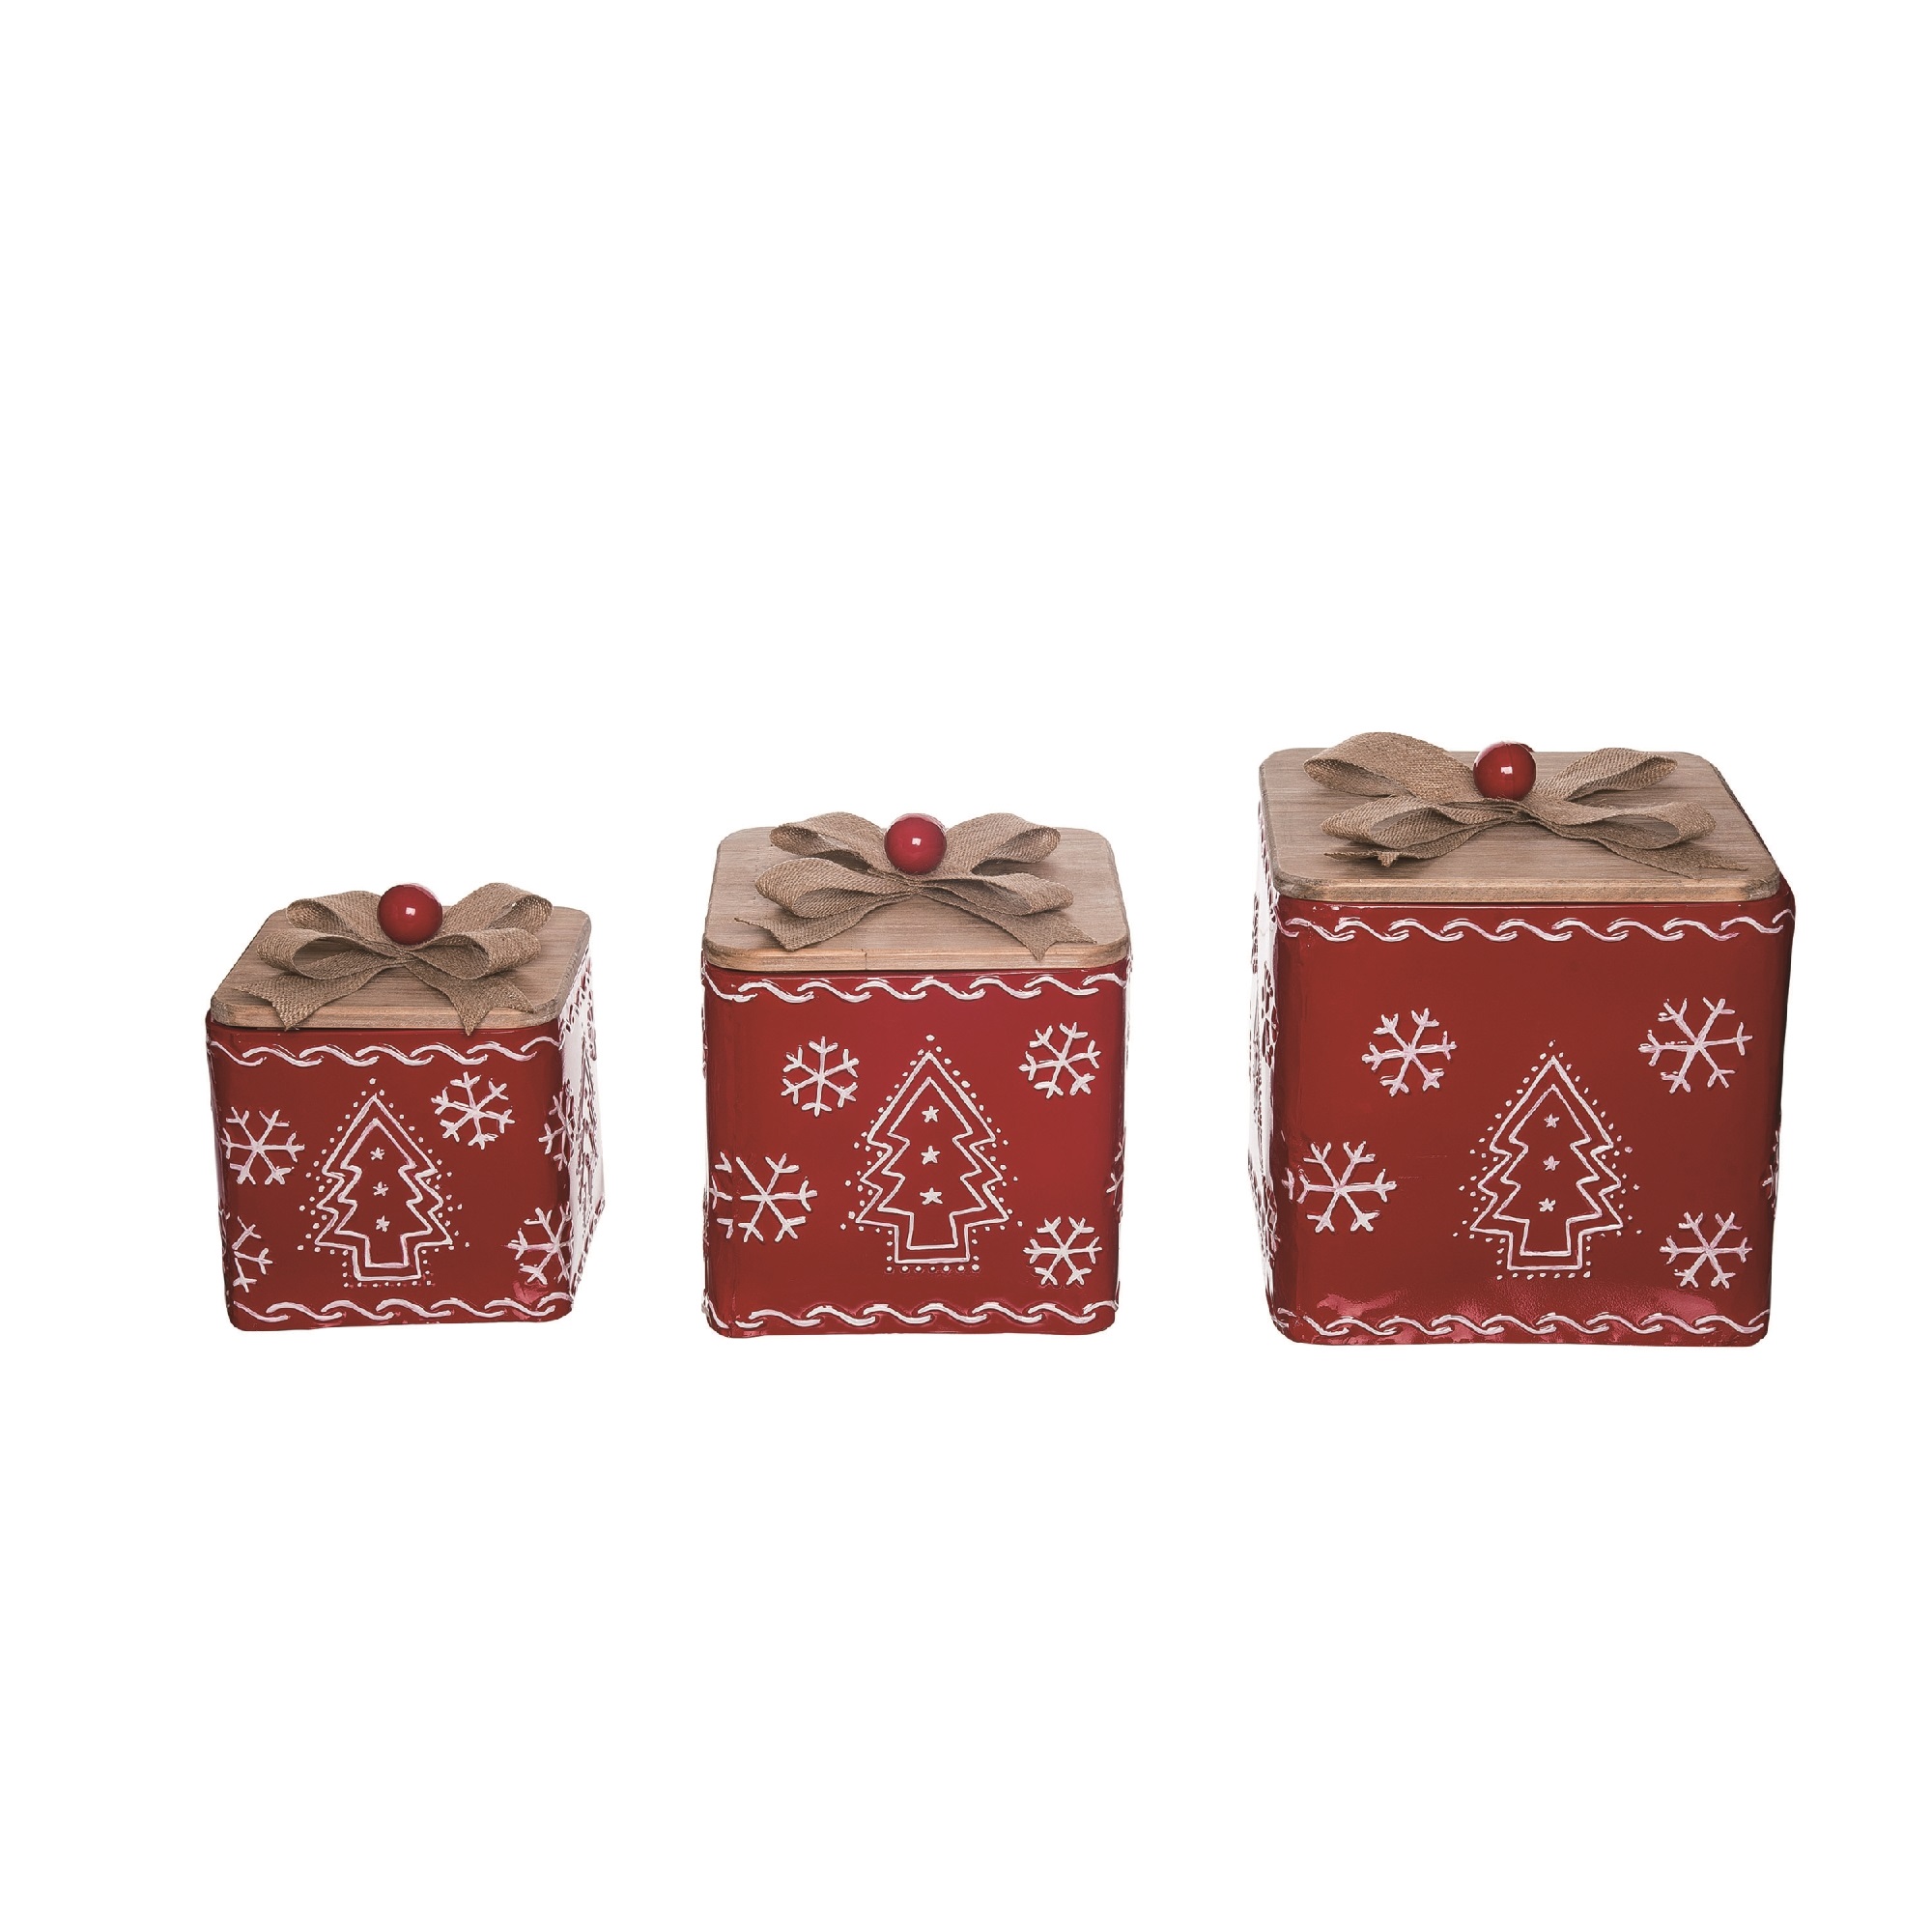 Contemporary Home Living Set of 3 Red and Brown Embossed Design Christmas Gift Box Decorations 12"